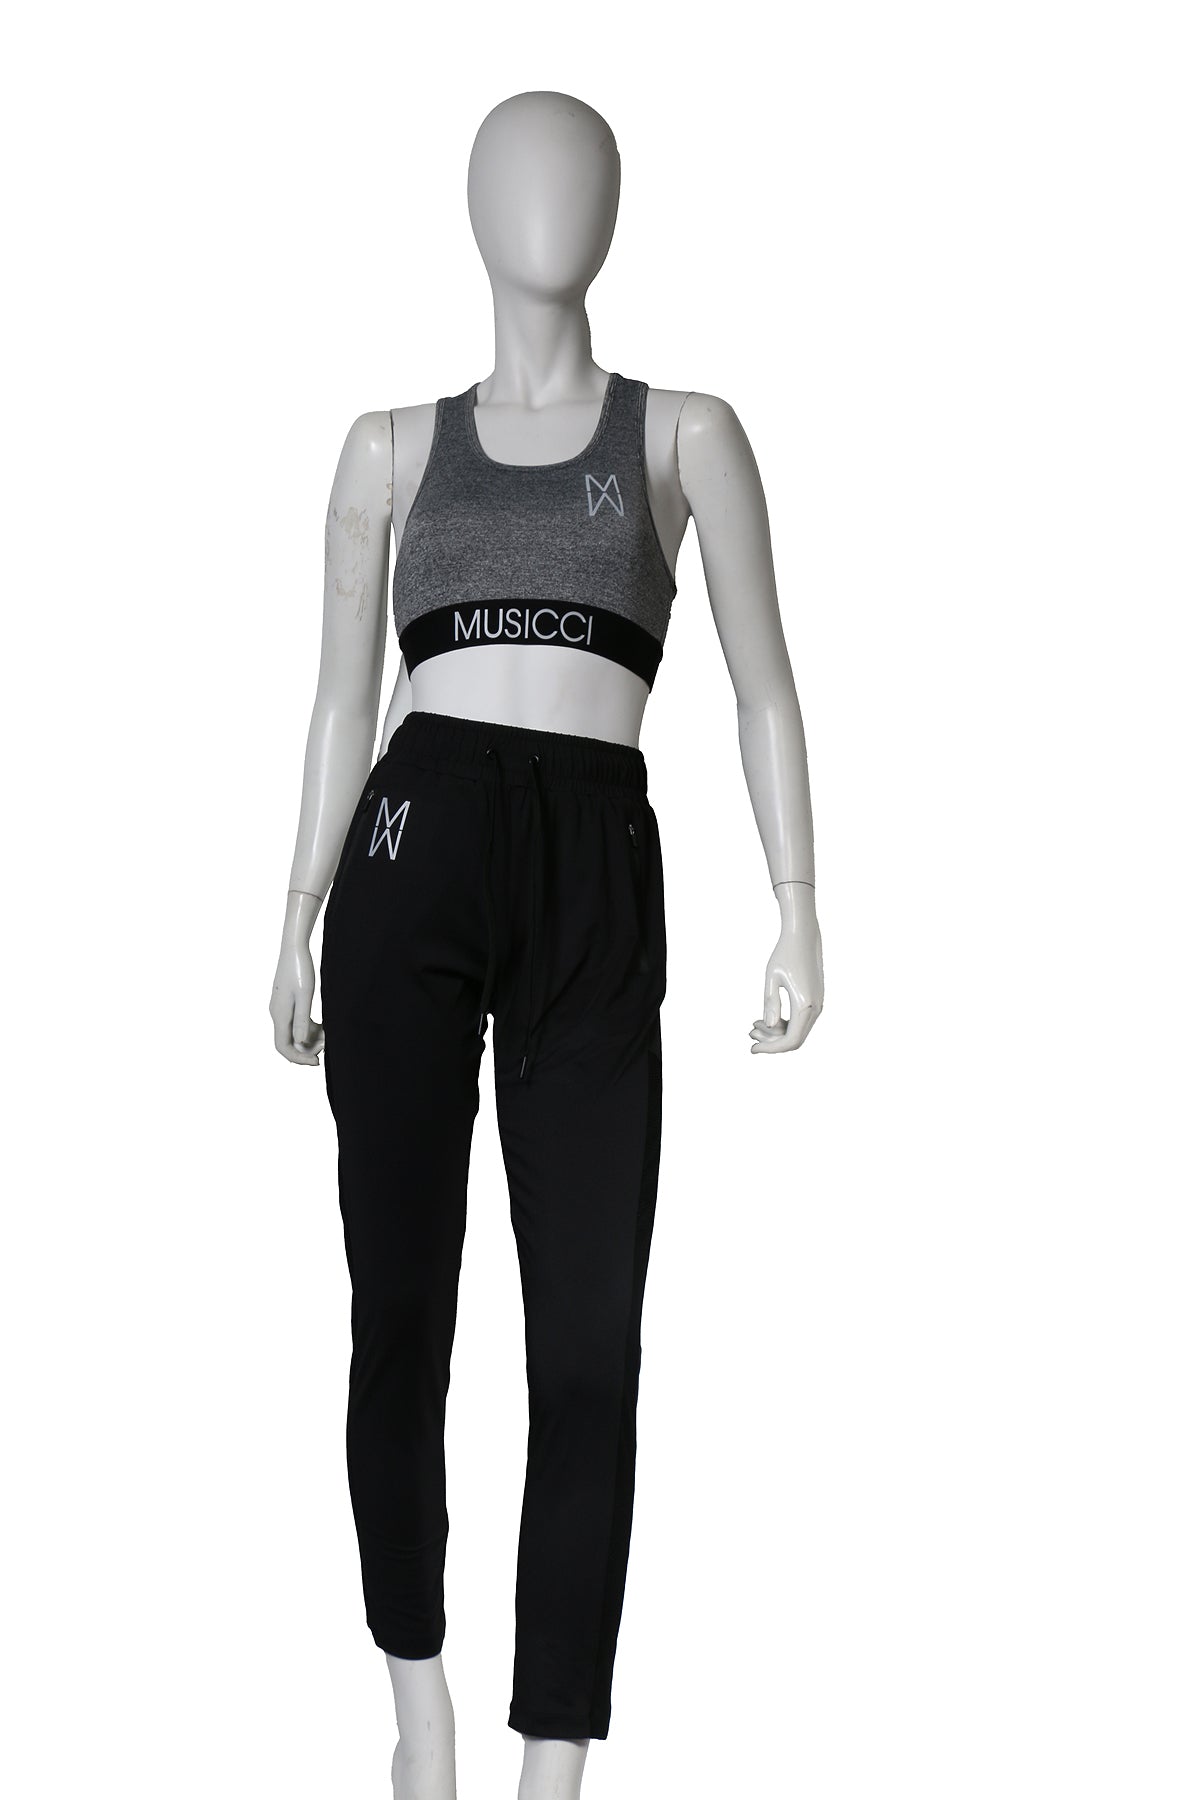 Musicci joggers for HER